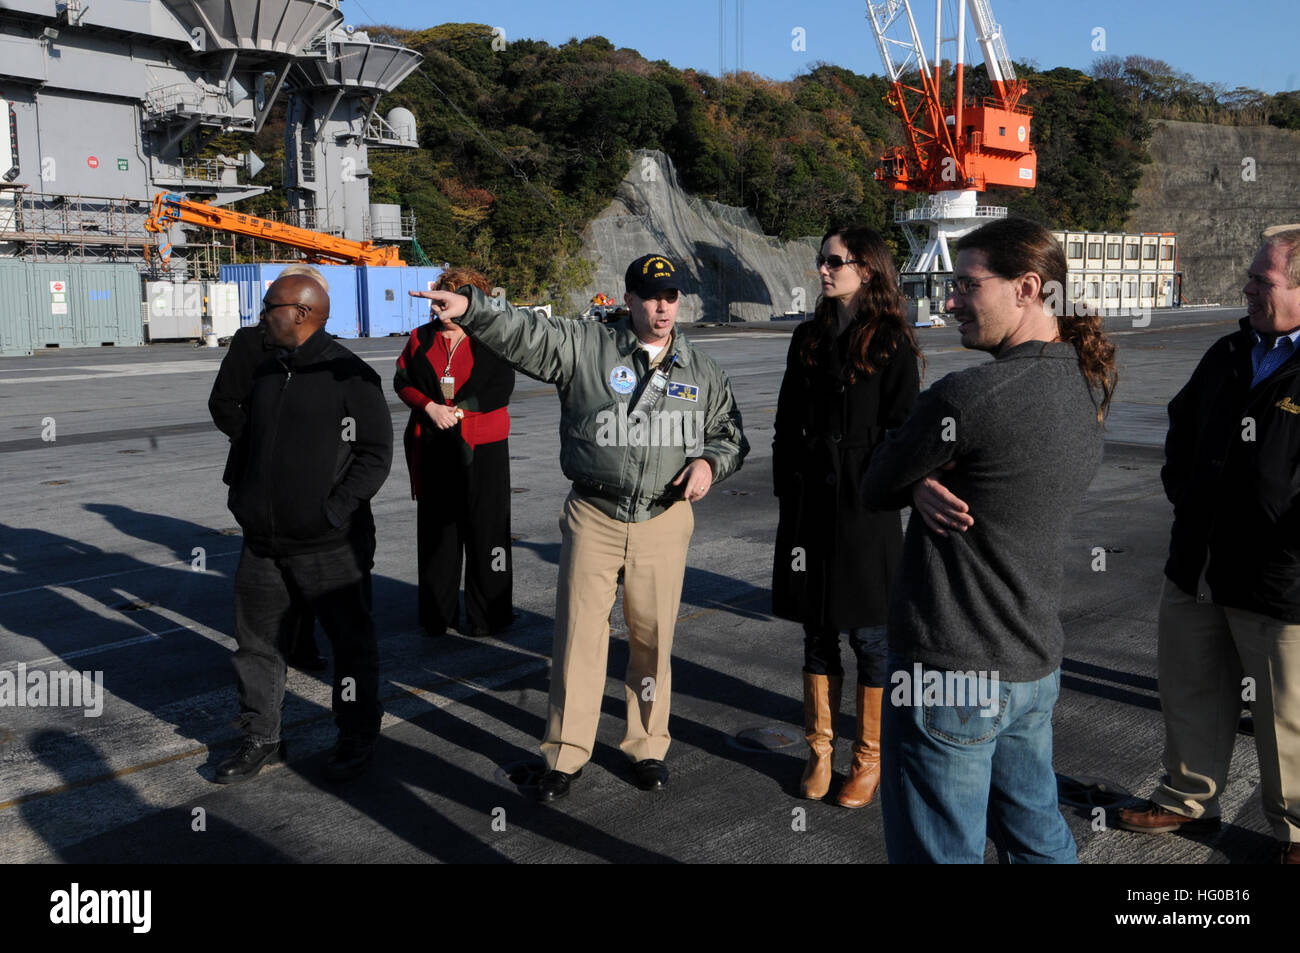 111213-N-JO245-050  YOKOSUKA, Japan (Dec. 13, 2011) Sarah Wayne Callies, a television and movie actress who recently starred as Lori Grimes in the Golden Globe nominated AMC series ÒThe Walking Dead,Ó tours the aircraft carrier USS George Washington (CVN 73) with Lt. cmdr. David Hecht, George Washington's public affairs officer.  George Washington is the Navy's only full-time forward-deployed aircraft carrier ensuring security and stability across the western Pacific Ocean. (U.S. Navy photo by Mass Communication Specialist 3rd Class Justin E. Yarborough/Released) US Navy 111213-N-JO245-050 A m Stock Photo